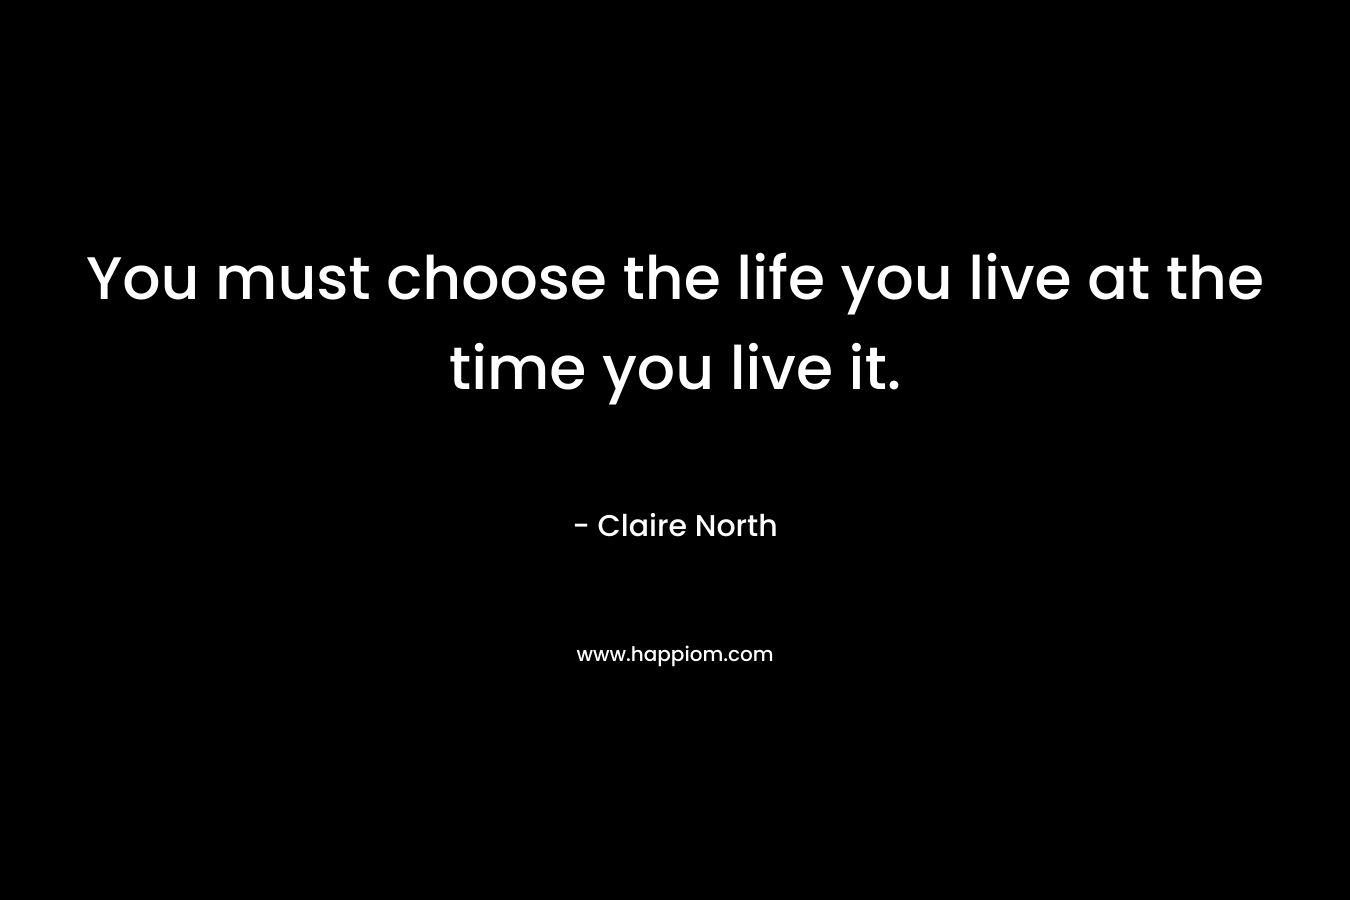 You must choose the life you live at the time you live it.